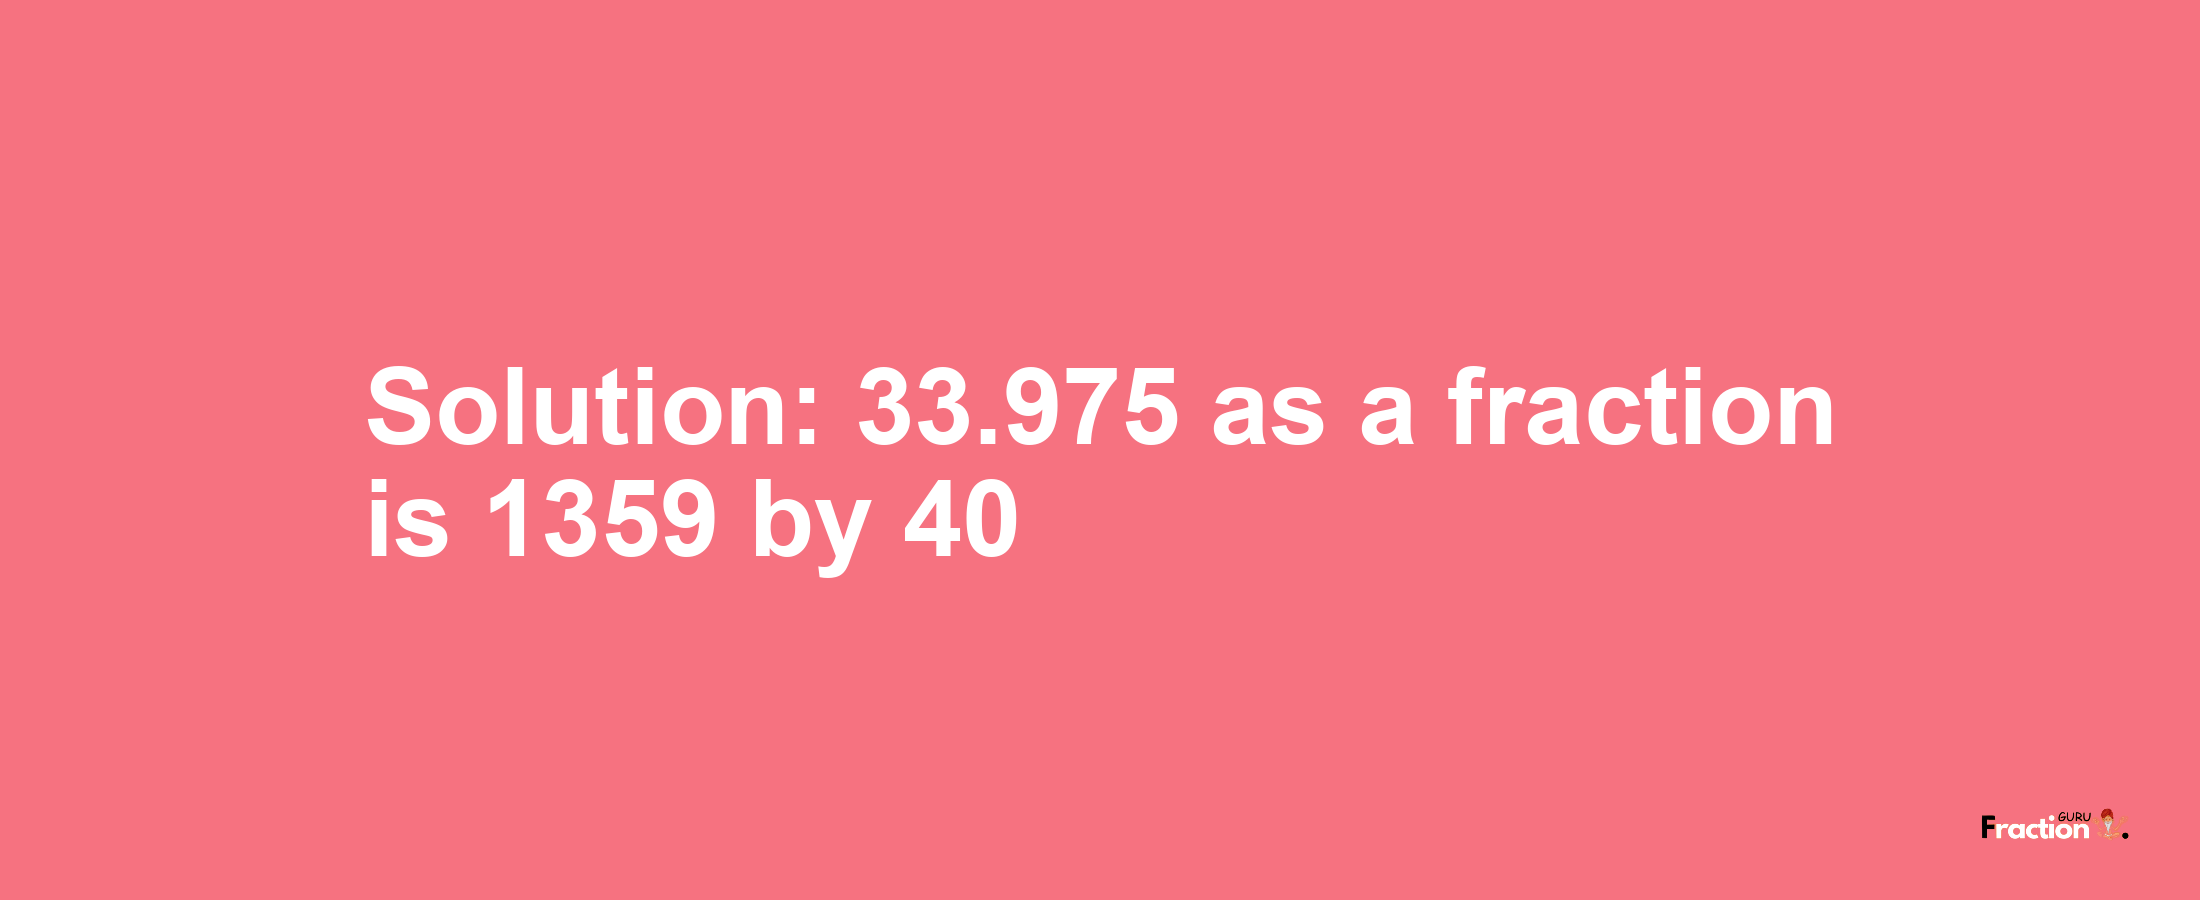 Solution:33.975 as a fraction is 1359/40